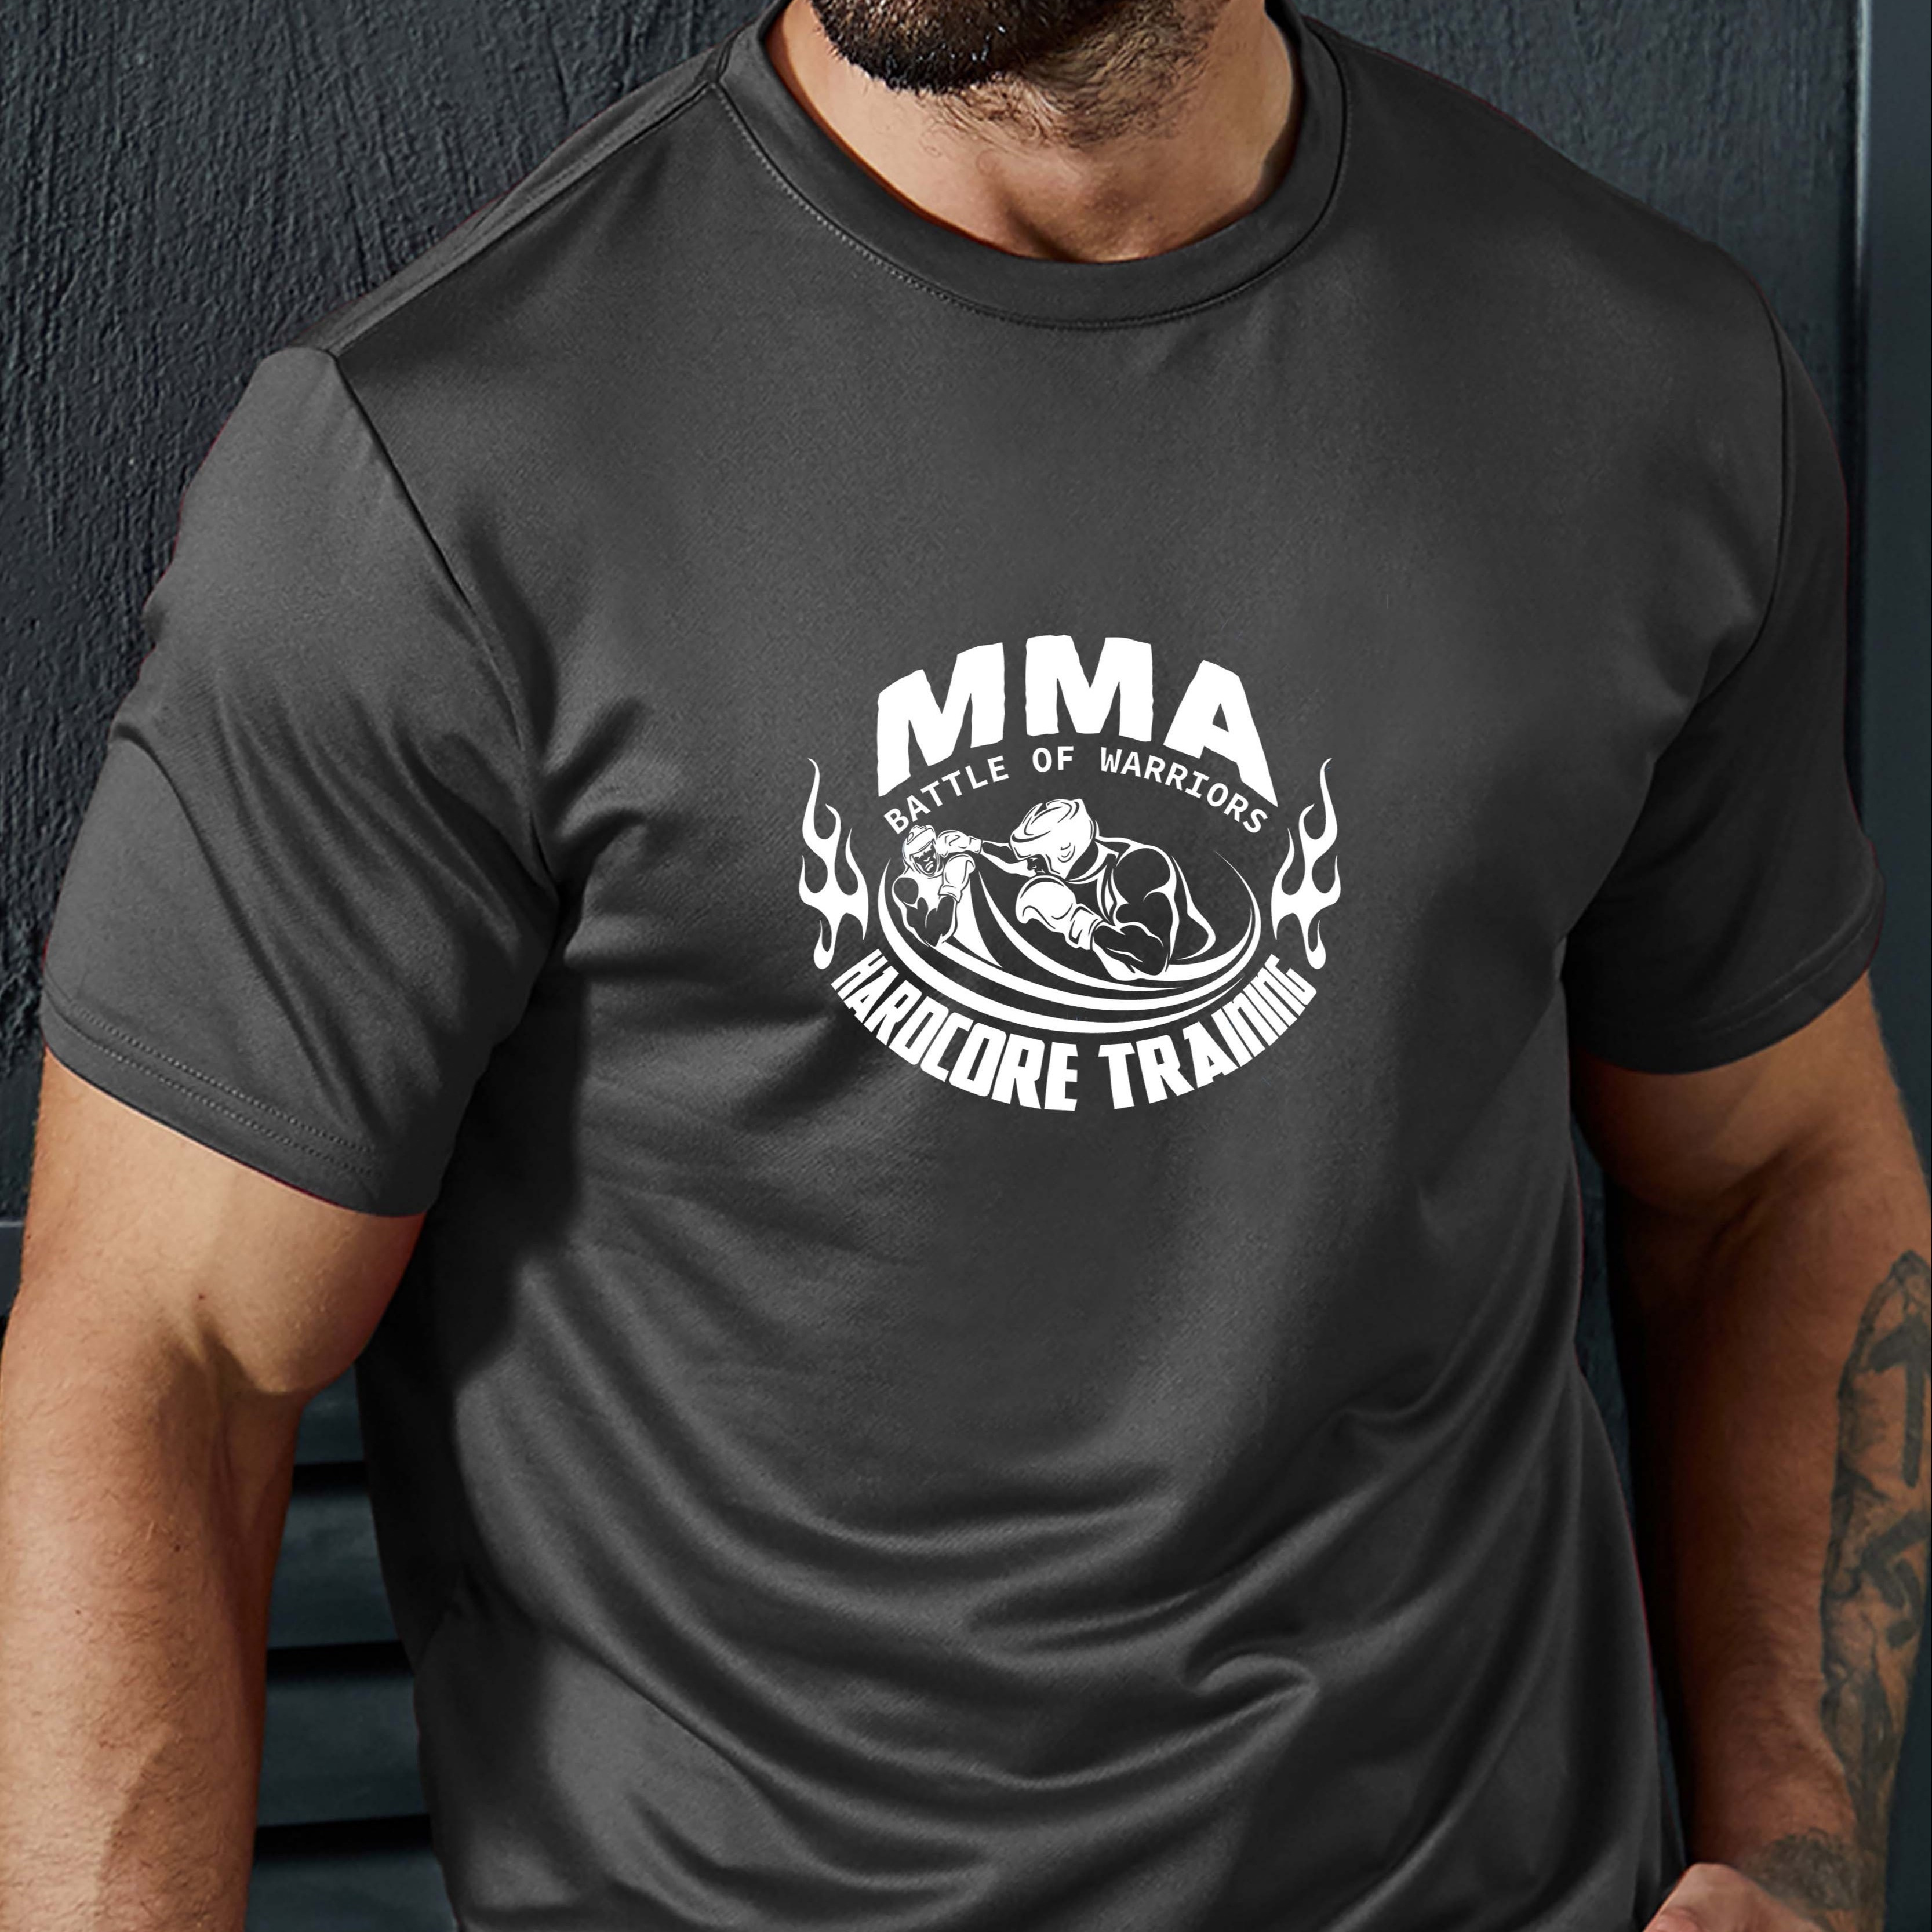 

Mma Hardcore Training And Boxer Graphic Print, Men's Comfy T-shirt, Casual Fit Tee, Cool Top Clothing For Men For Summer For Everyday Activities